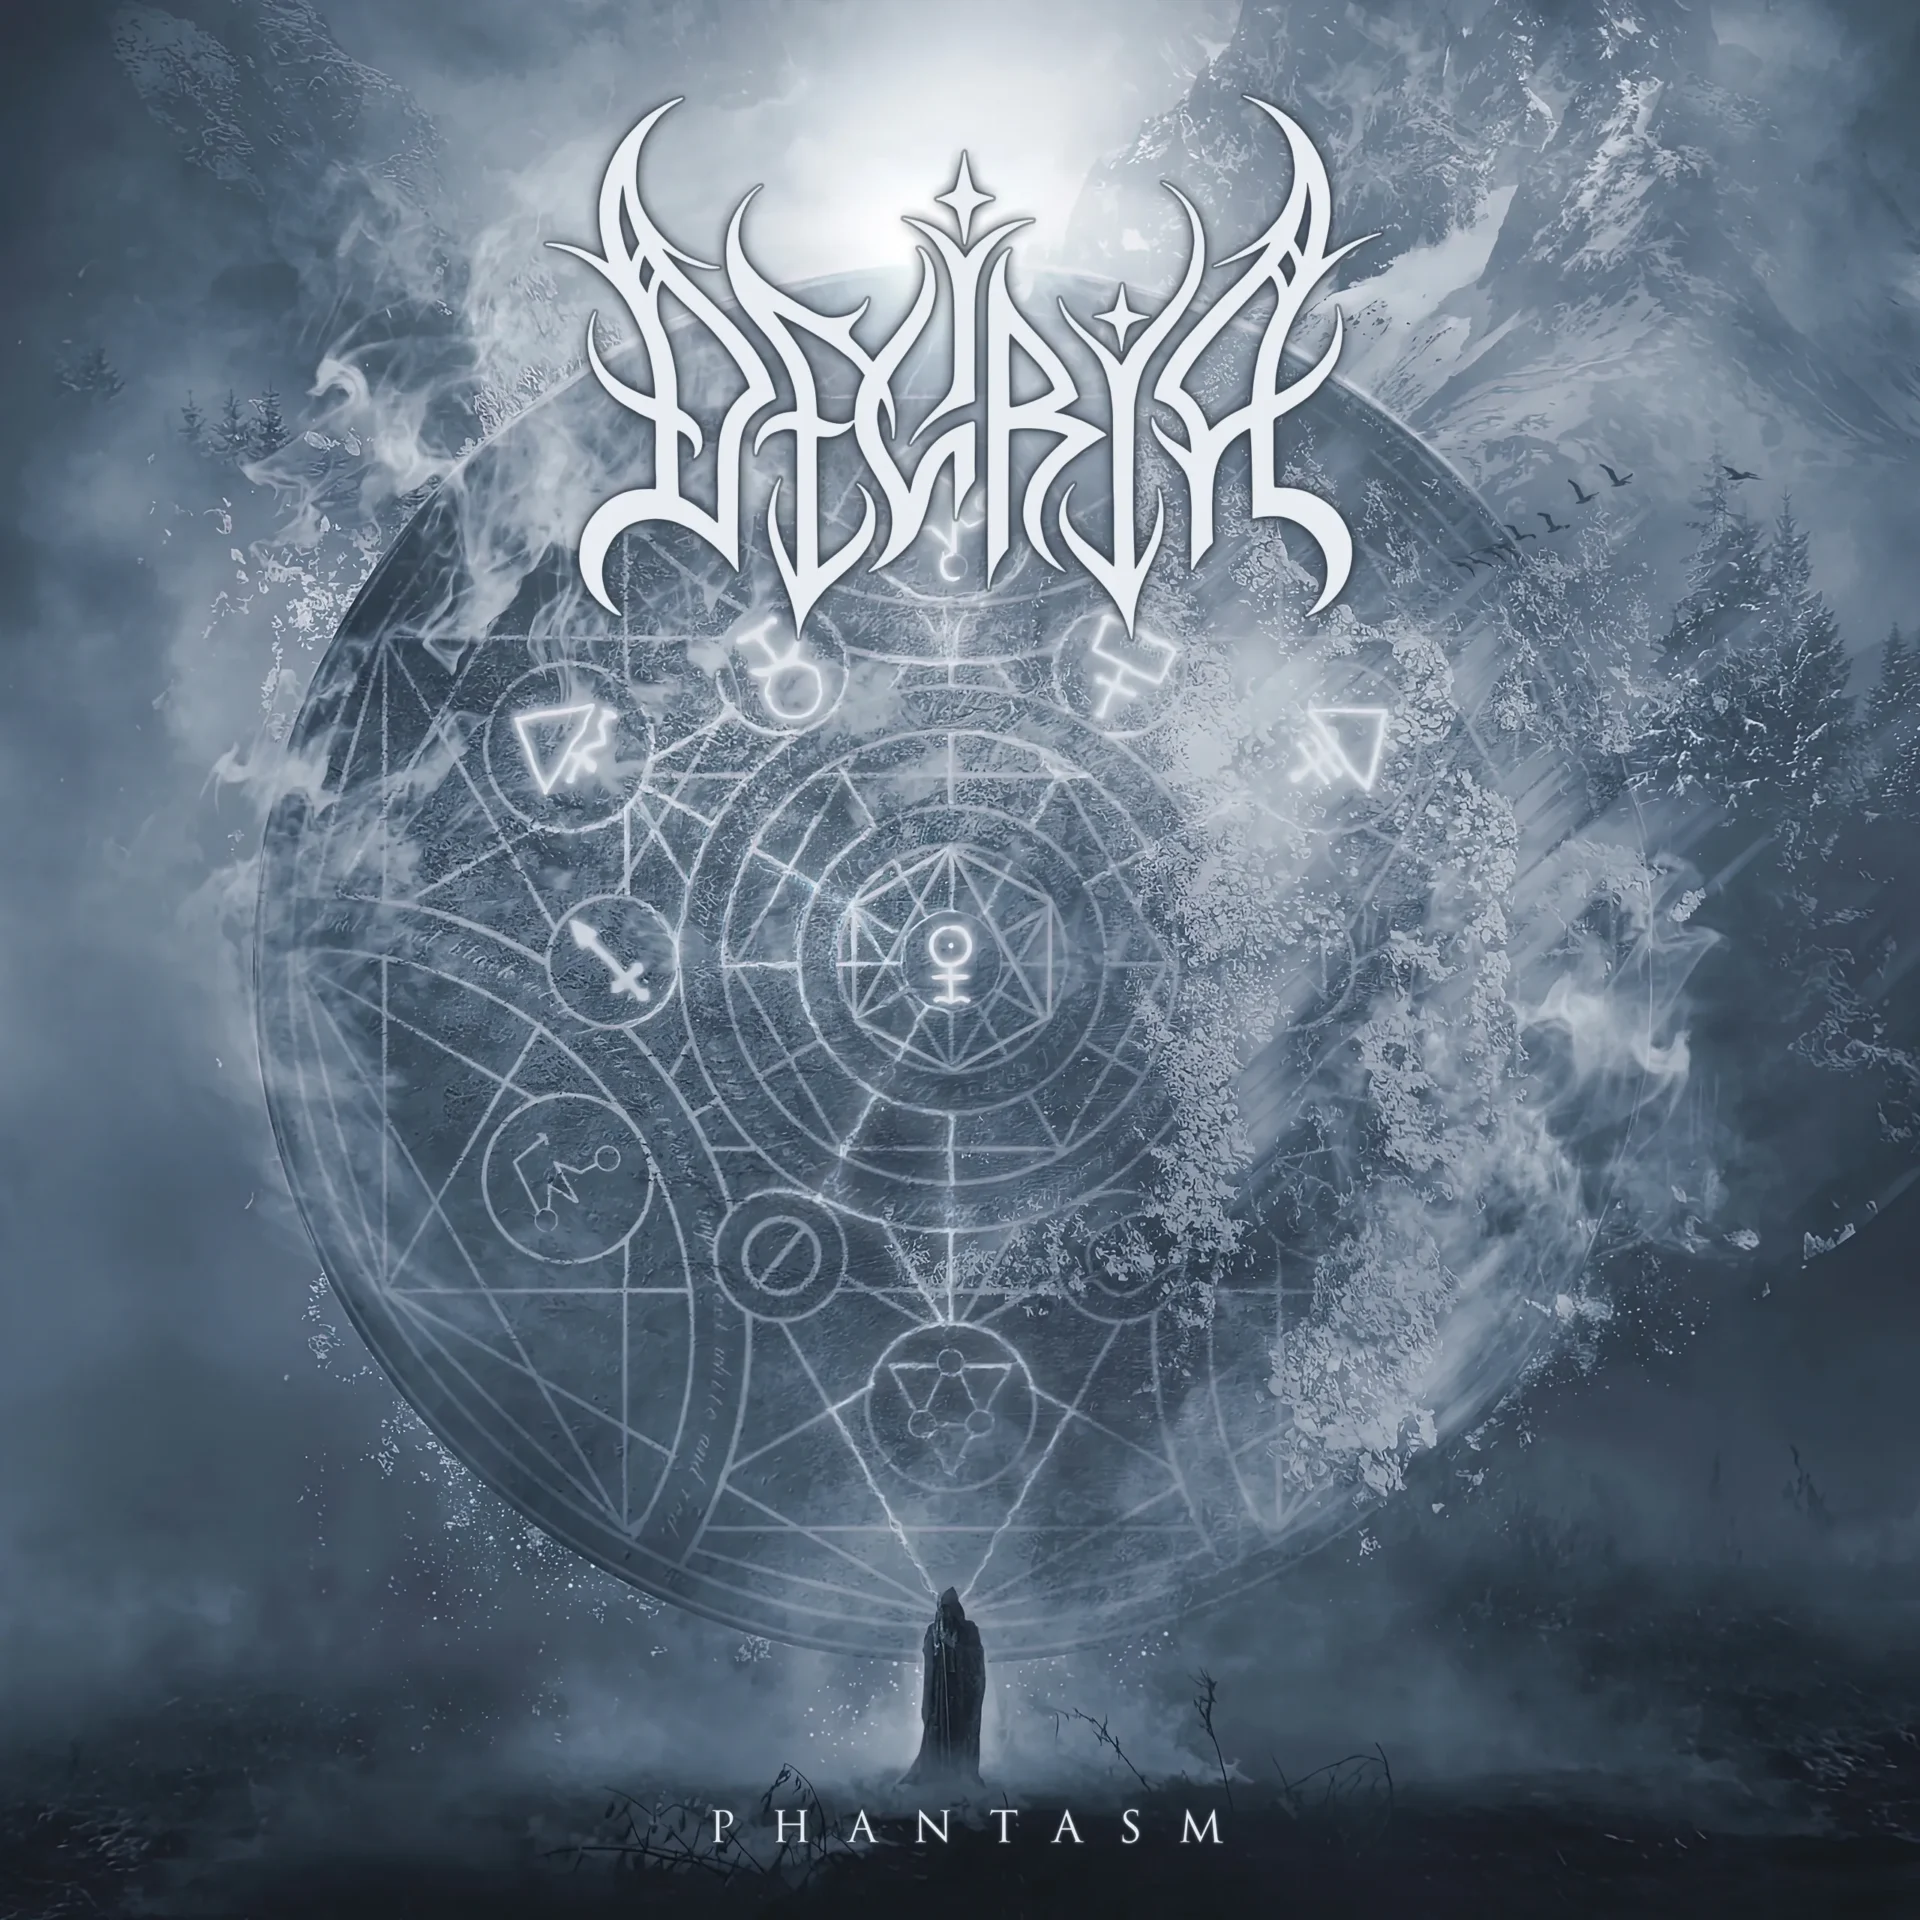 A picture of the cover art for the album Phantasm.